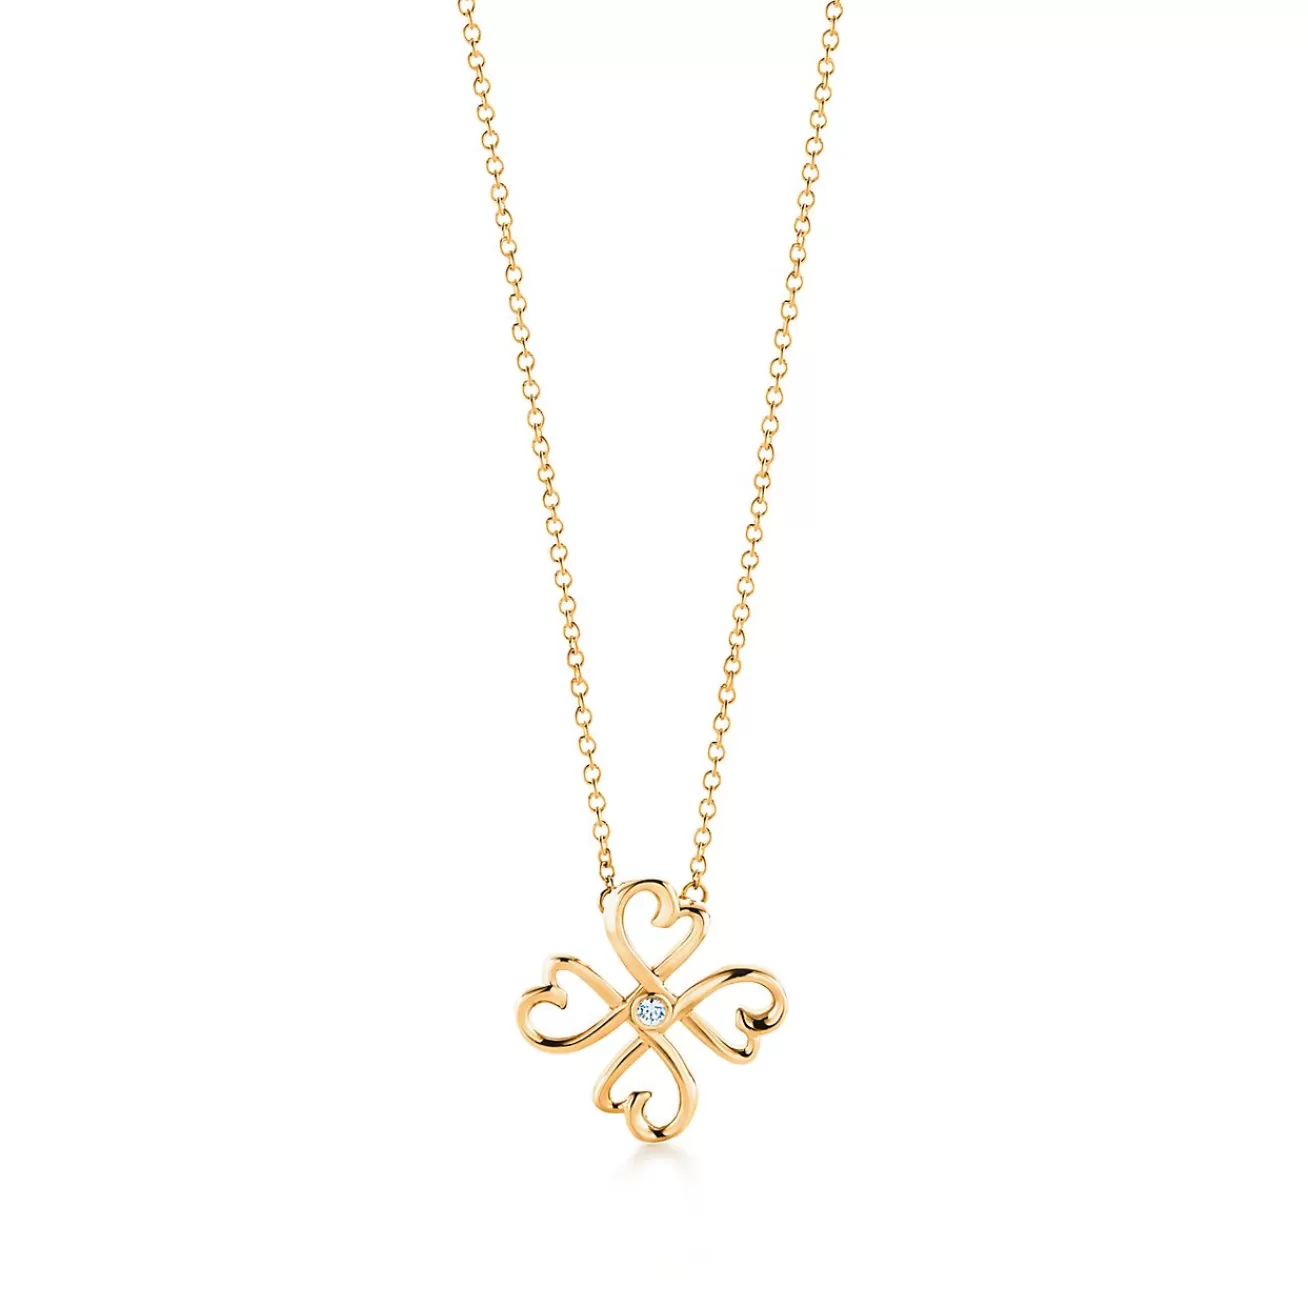 Tiffany & Co. Paloma Picasso® Loving Heart pendant in 18k gold with a diamond. | ^ Necklaces & Pendants | Gold Jewelry